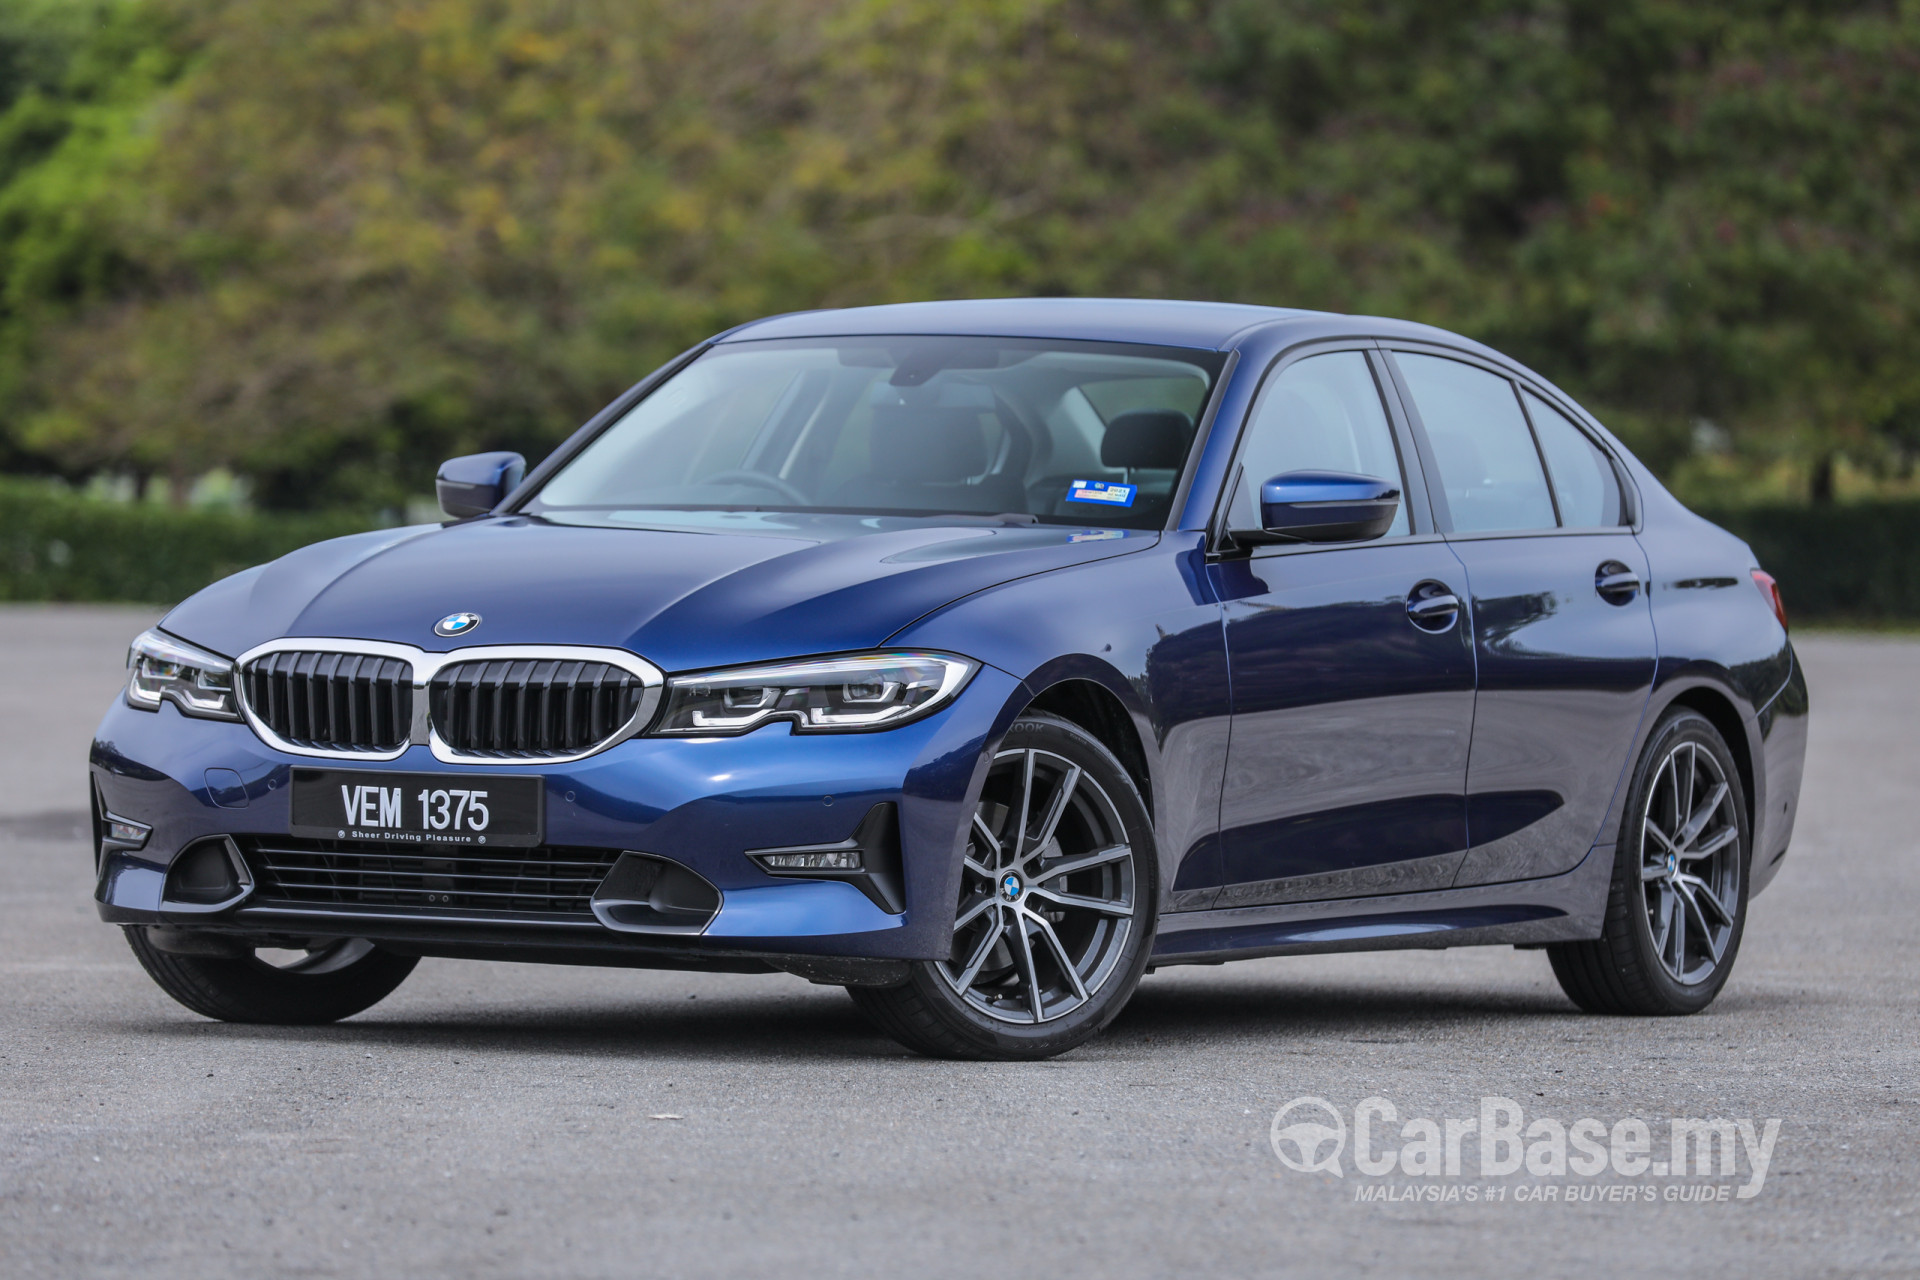 BMW 3 Series G20 (2019) Exterior Image 68597 in Malaysia